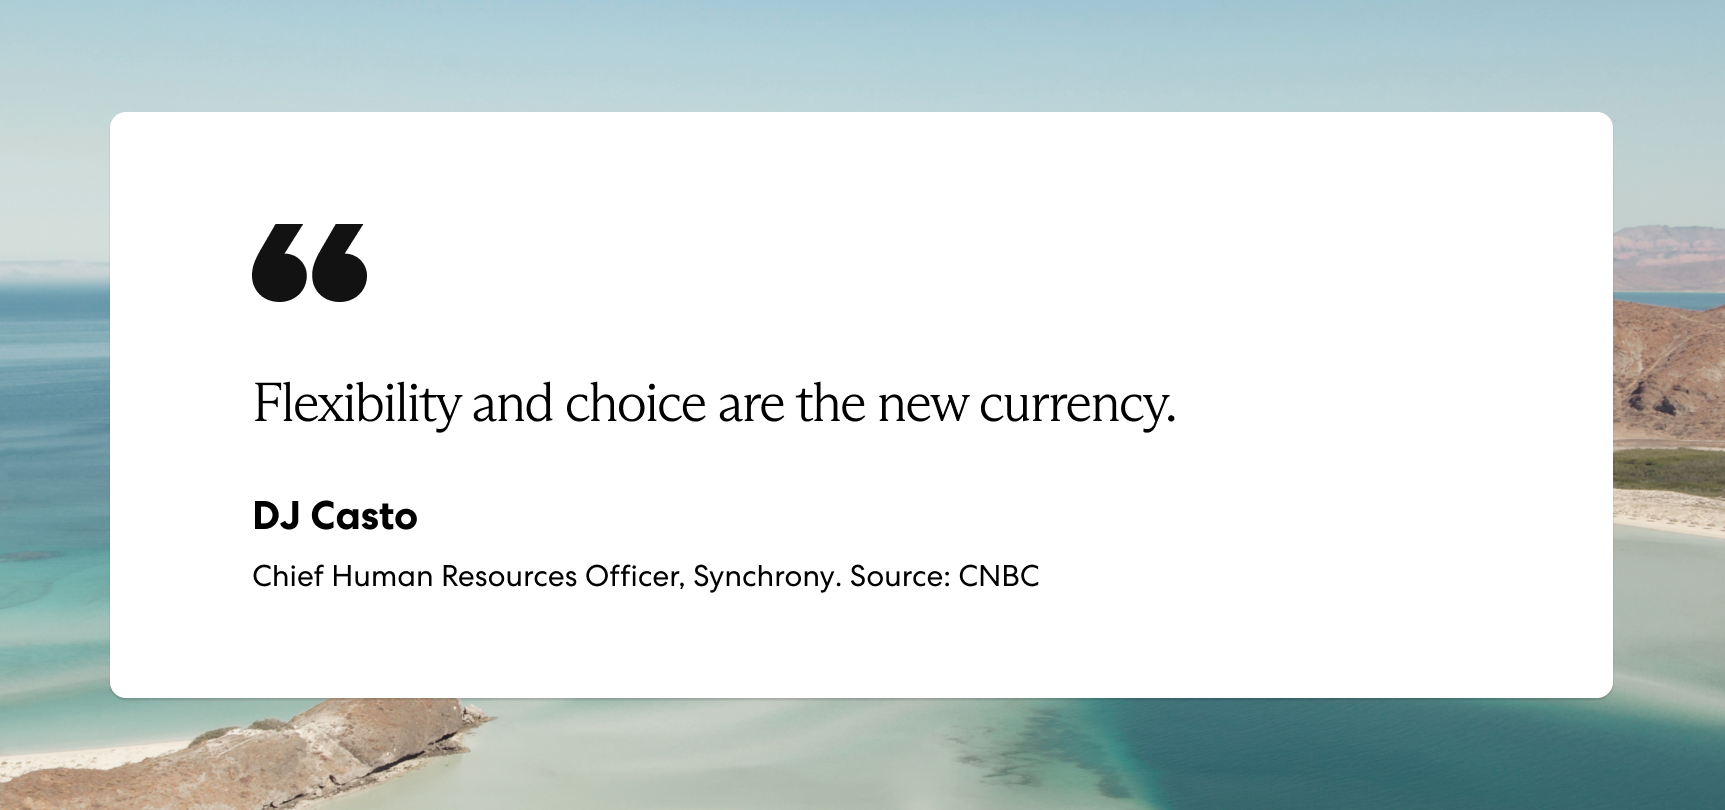 Flexibility and choice are the new currency.